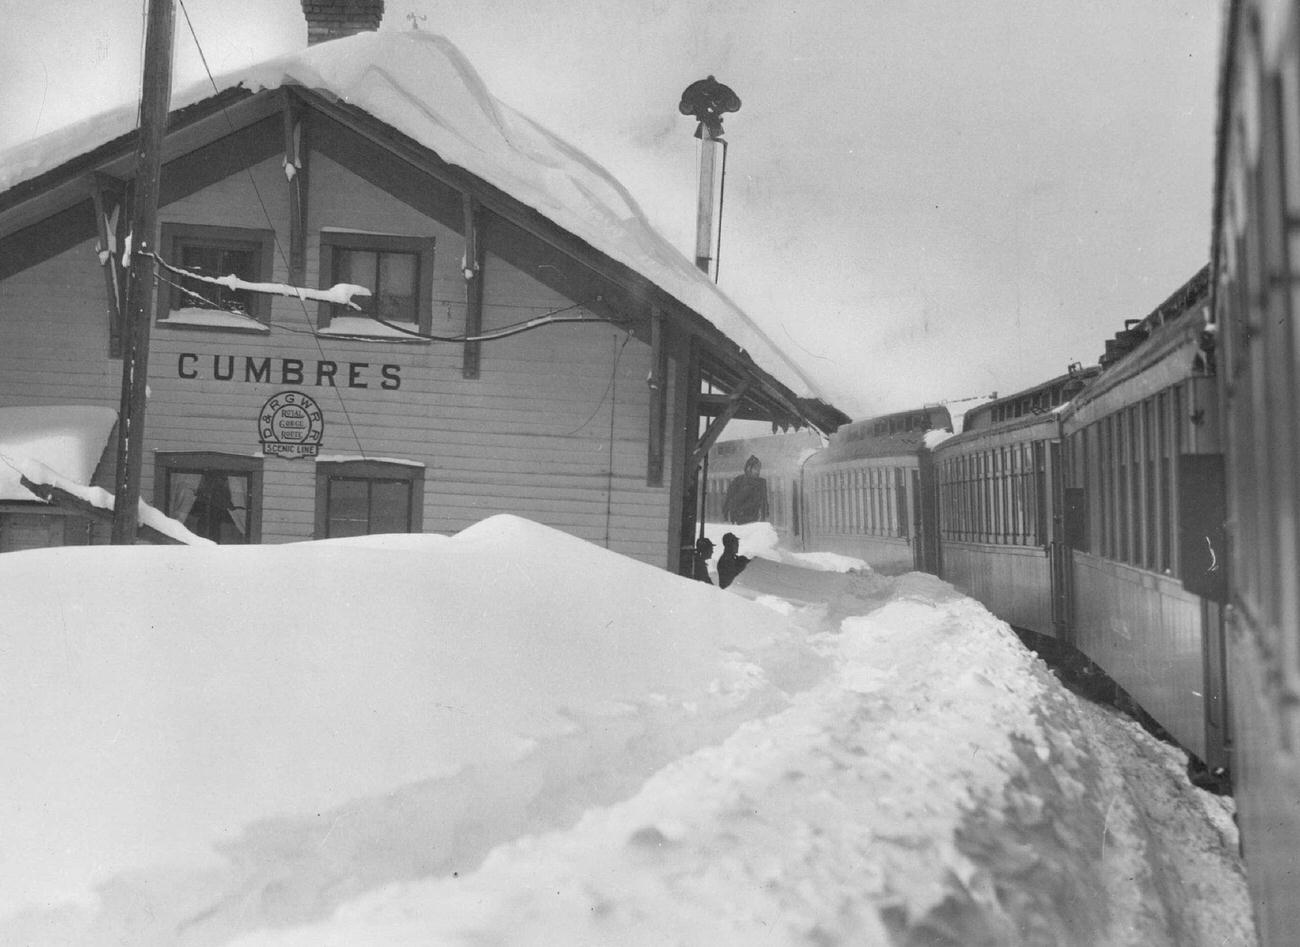 Four feet of new snow lies on the ground in below-zero temperatures as the last train puffs into Cumbres, the station a top 10, 015-foot Cumbres pass on the Colorado-New Mexico line.